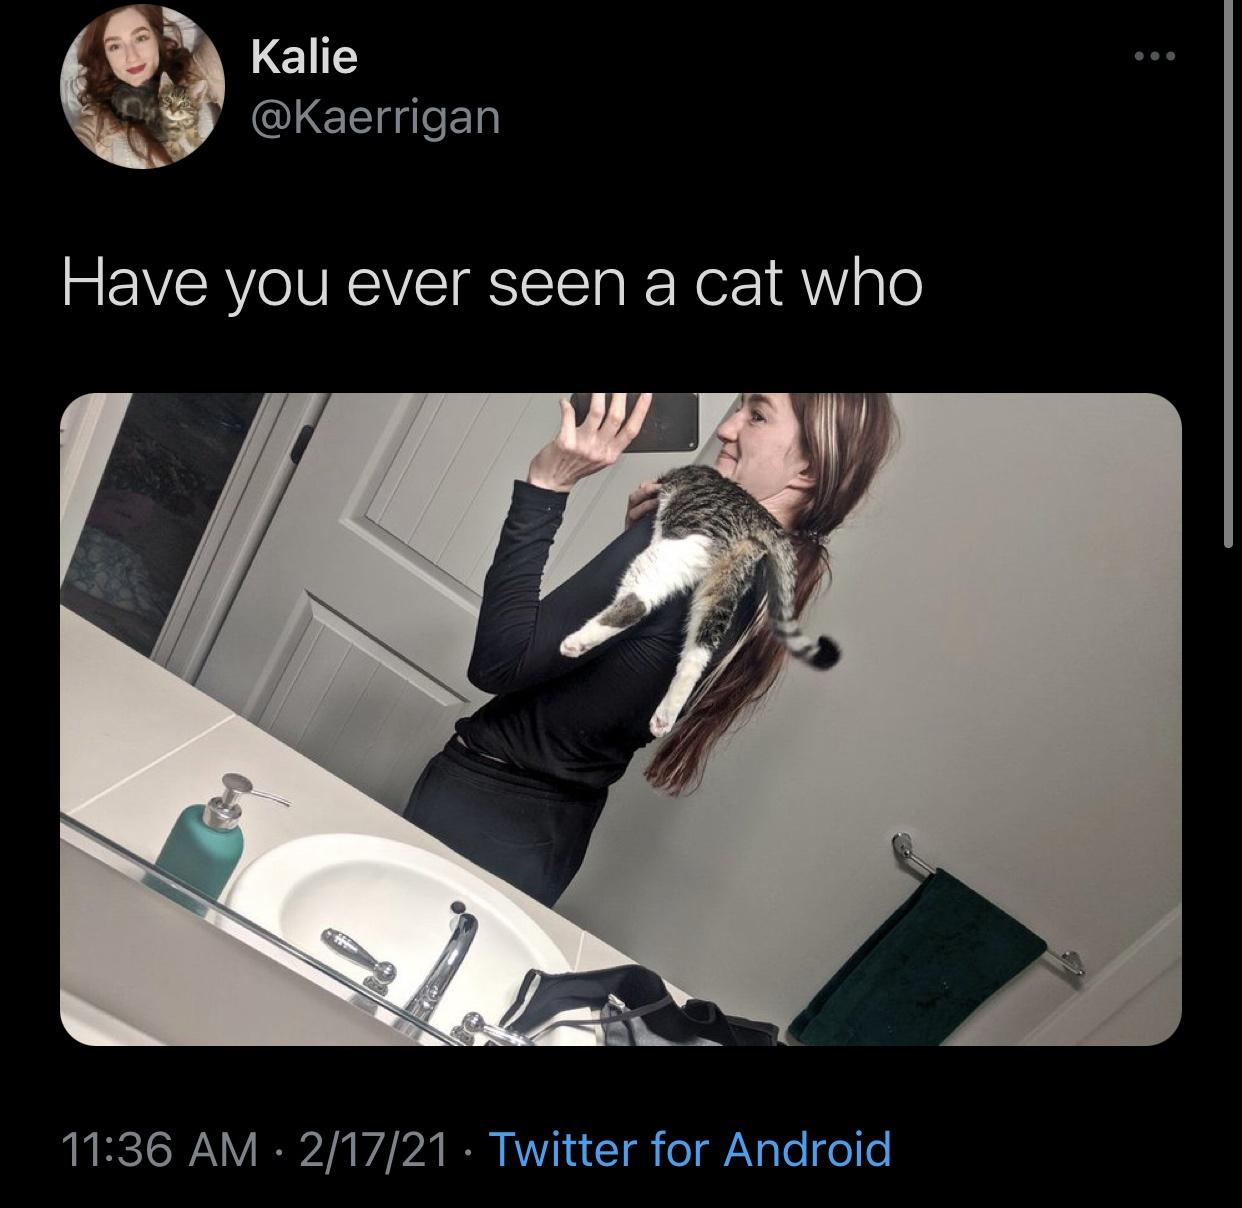 arm - Kalie Have you ever seen a cat who th 21721 Twitter for Android